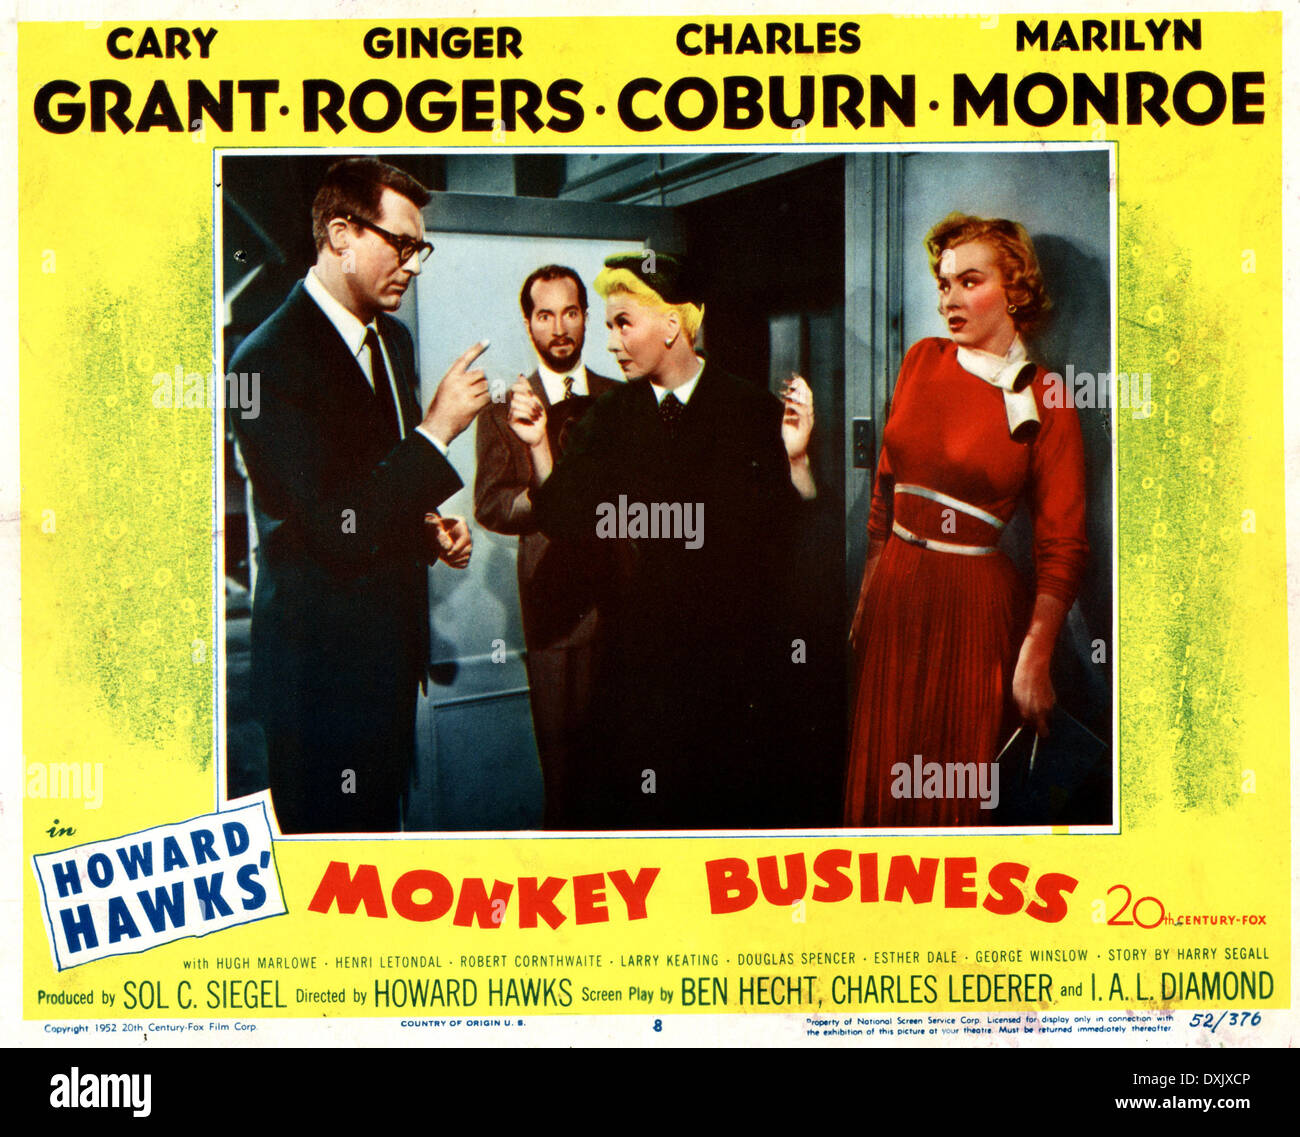 MONKEY BUSINESS (US1952) CARY GRANT, GINGER ROGERS, MARILYN Stock Photo